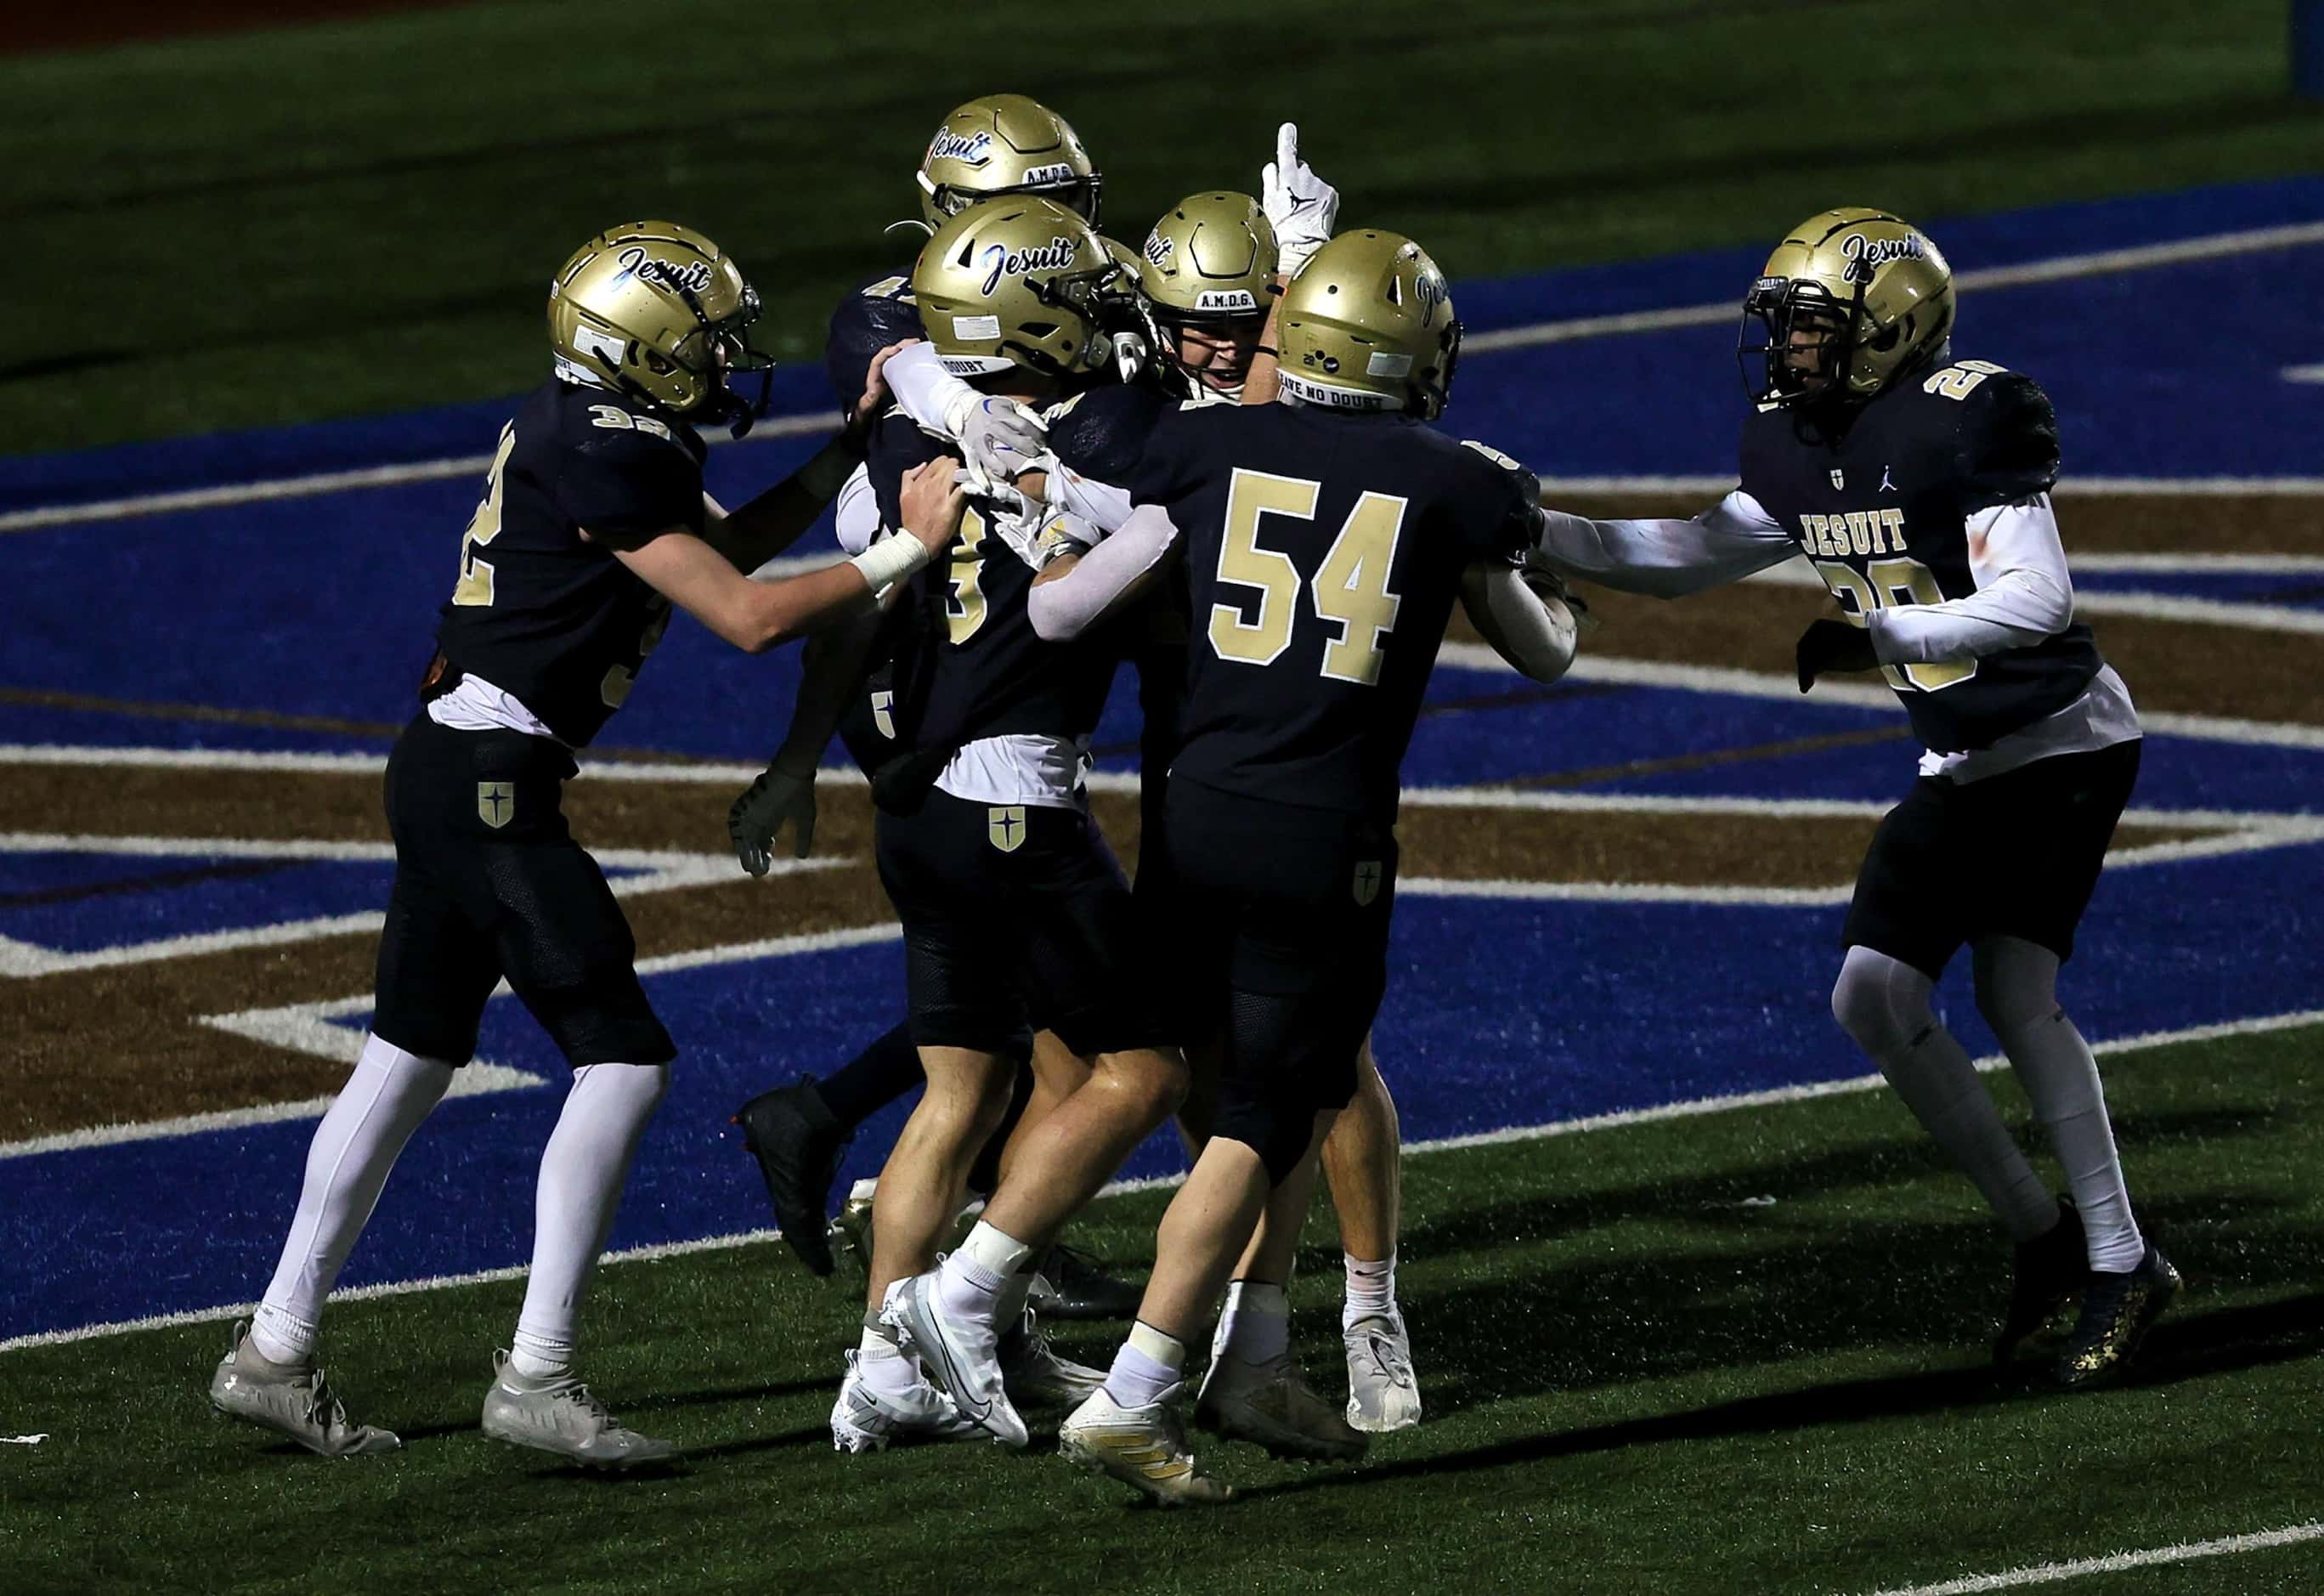 The Jesuit Rangers celebrate a victory over MacArthur, 16-12 in a District 7-6A High School...